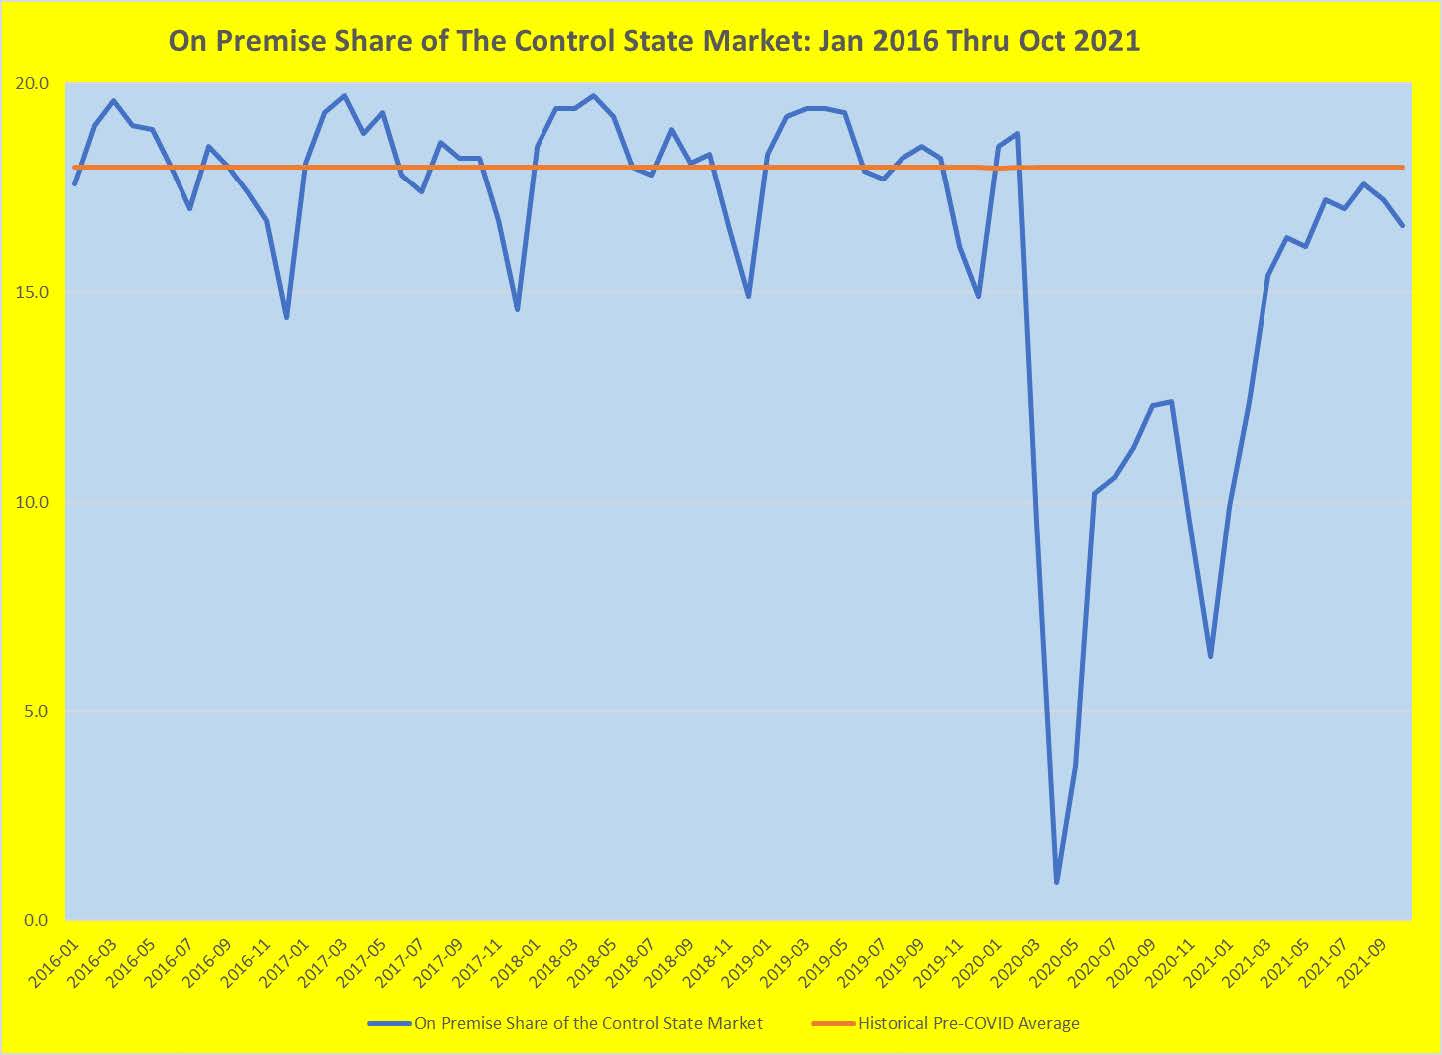 On Premise Share of the Control State Market:  Jan 2016-Oct 2021